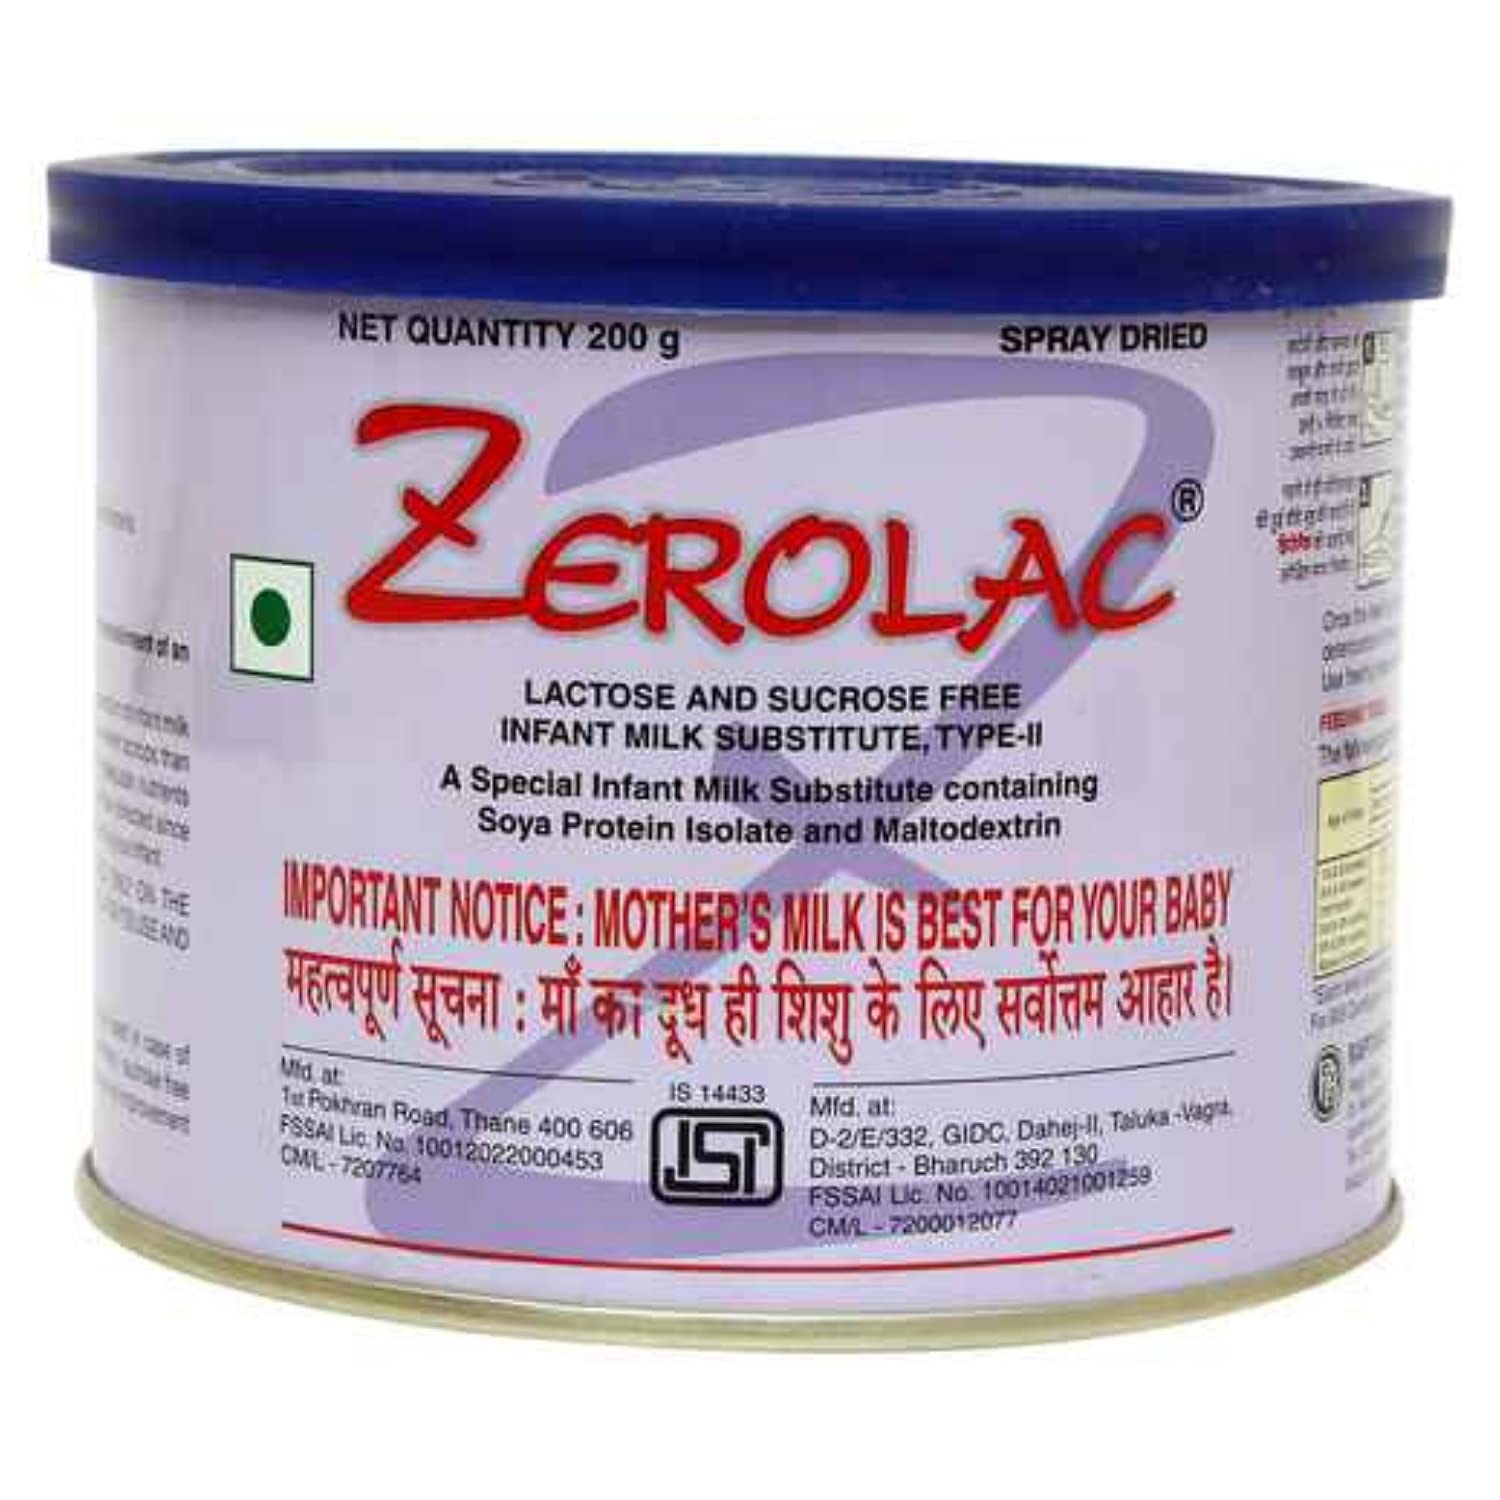 Zerolac Powder with Soy Protein Isolate, Nucleotides & Maltodextrin for Infants | Lactose & Sucrose Free